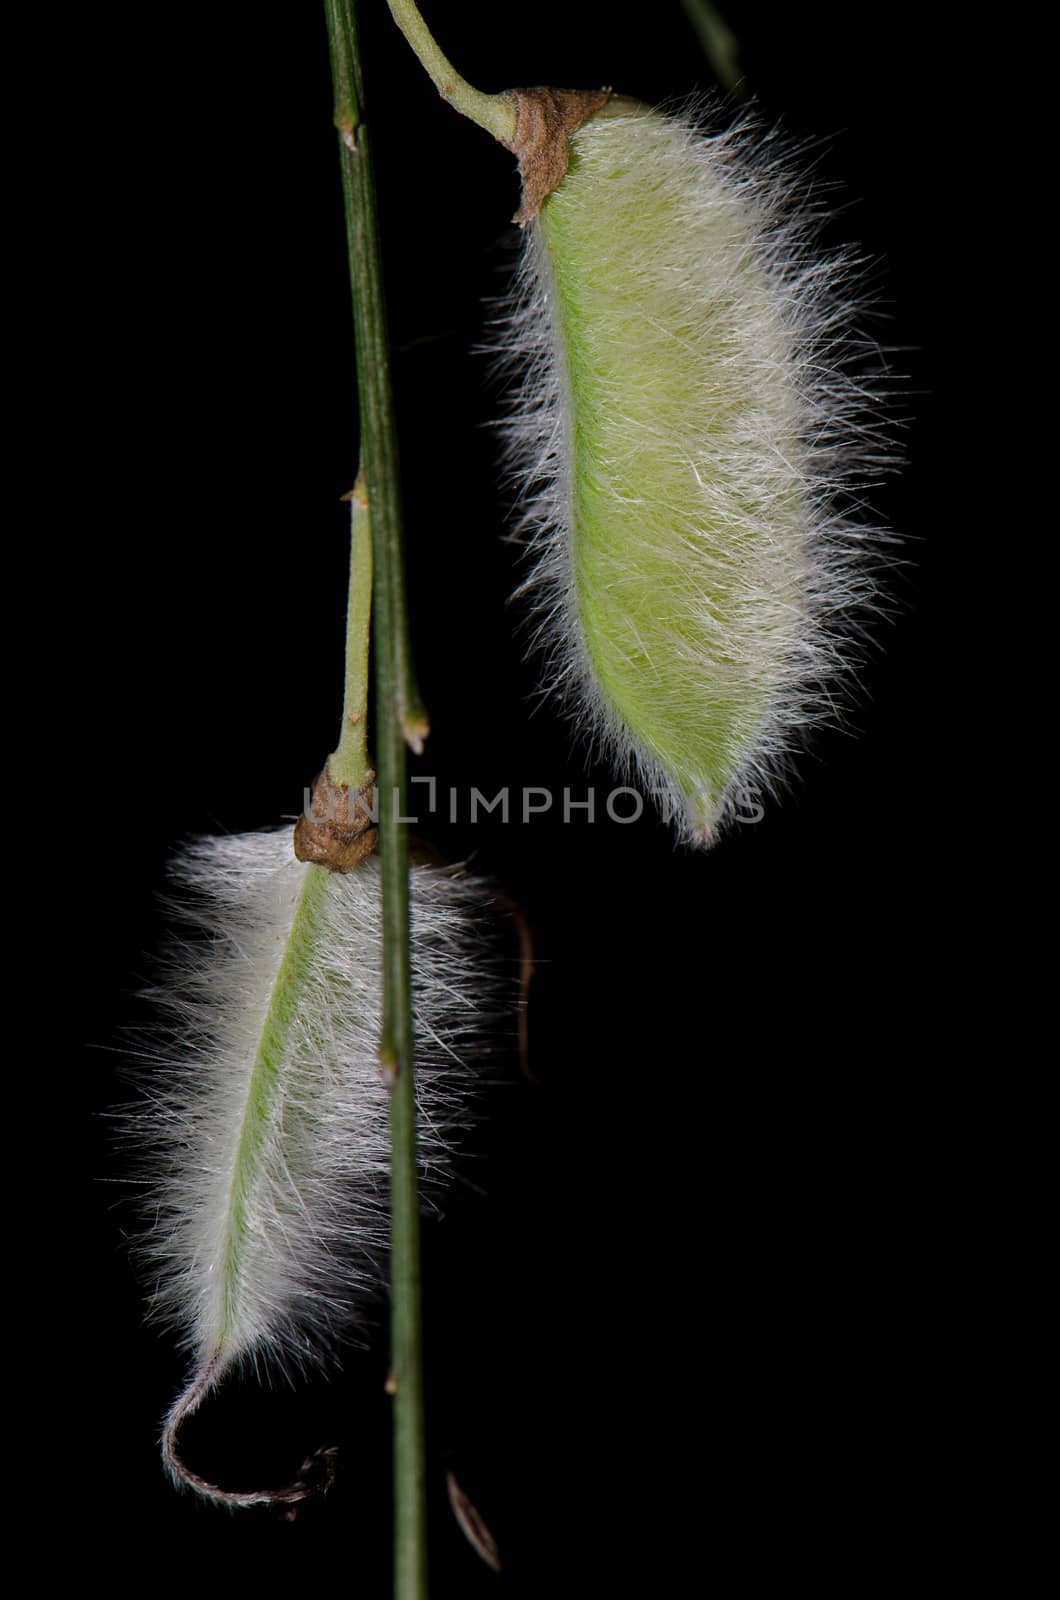 Hairy pods of hairy-fruited broom Cytisus striatus. by VictorSuarez